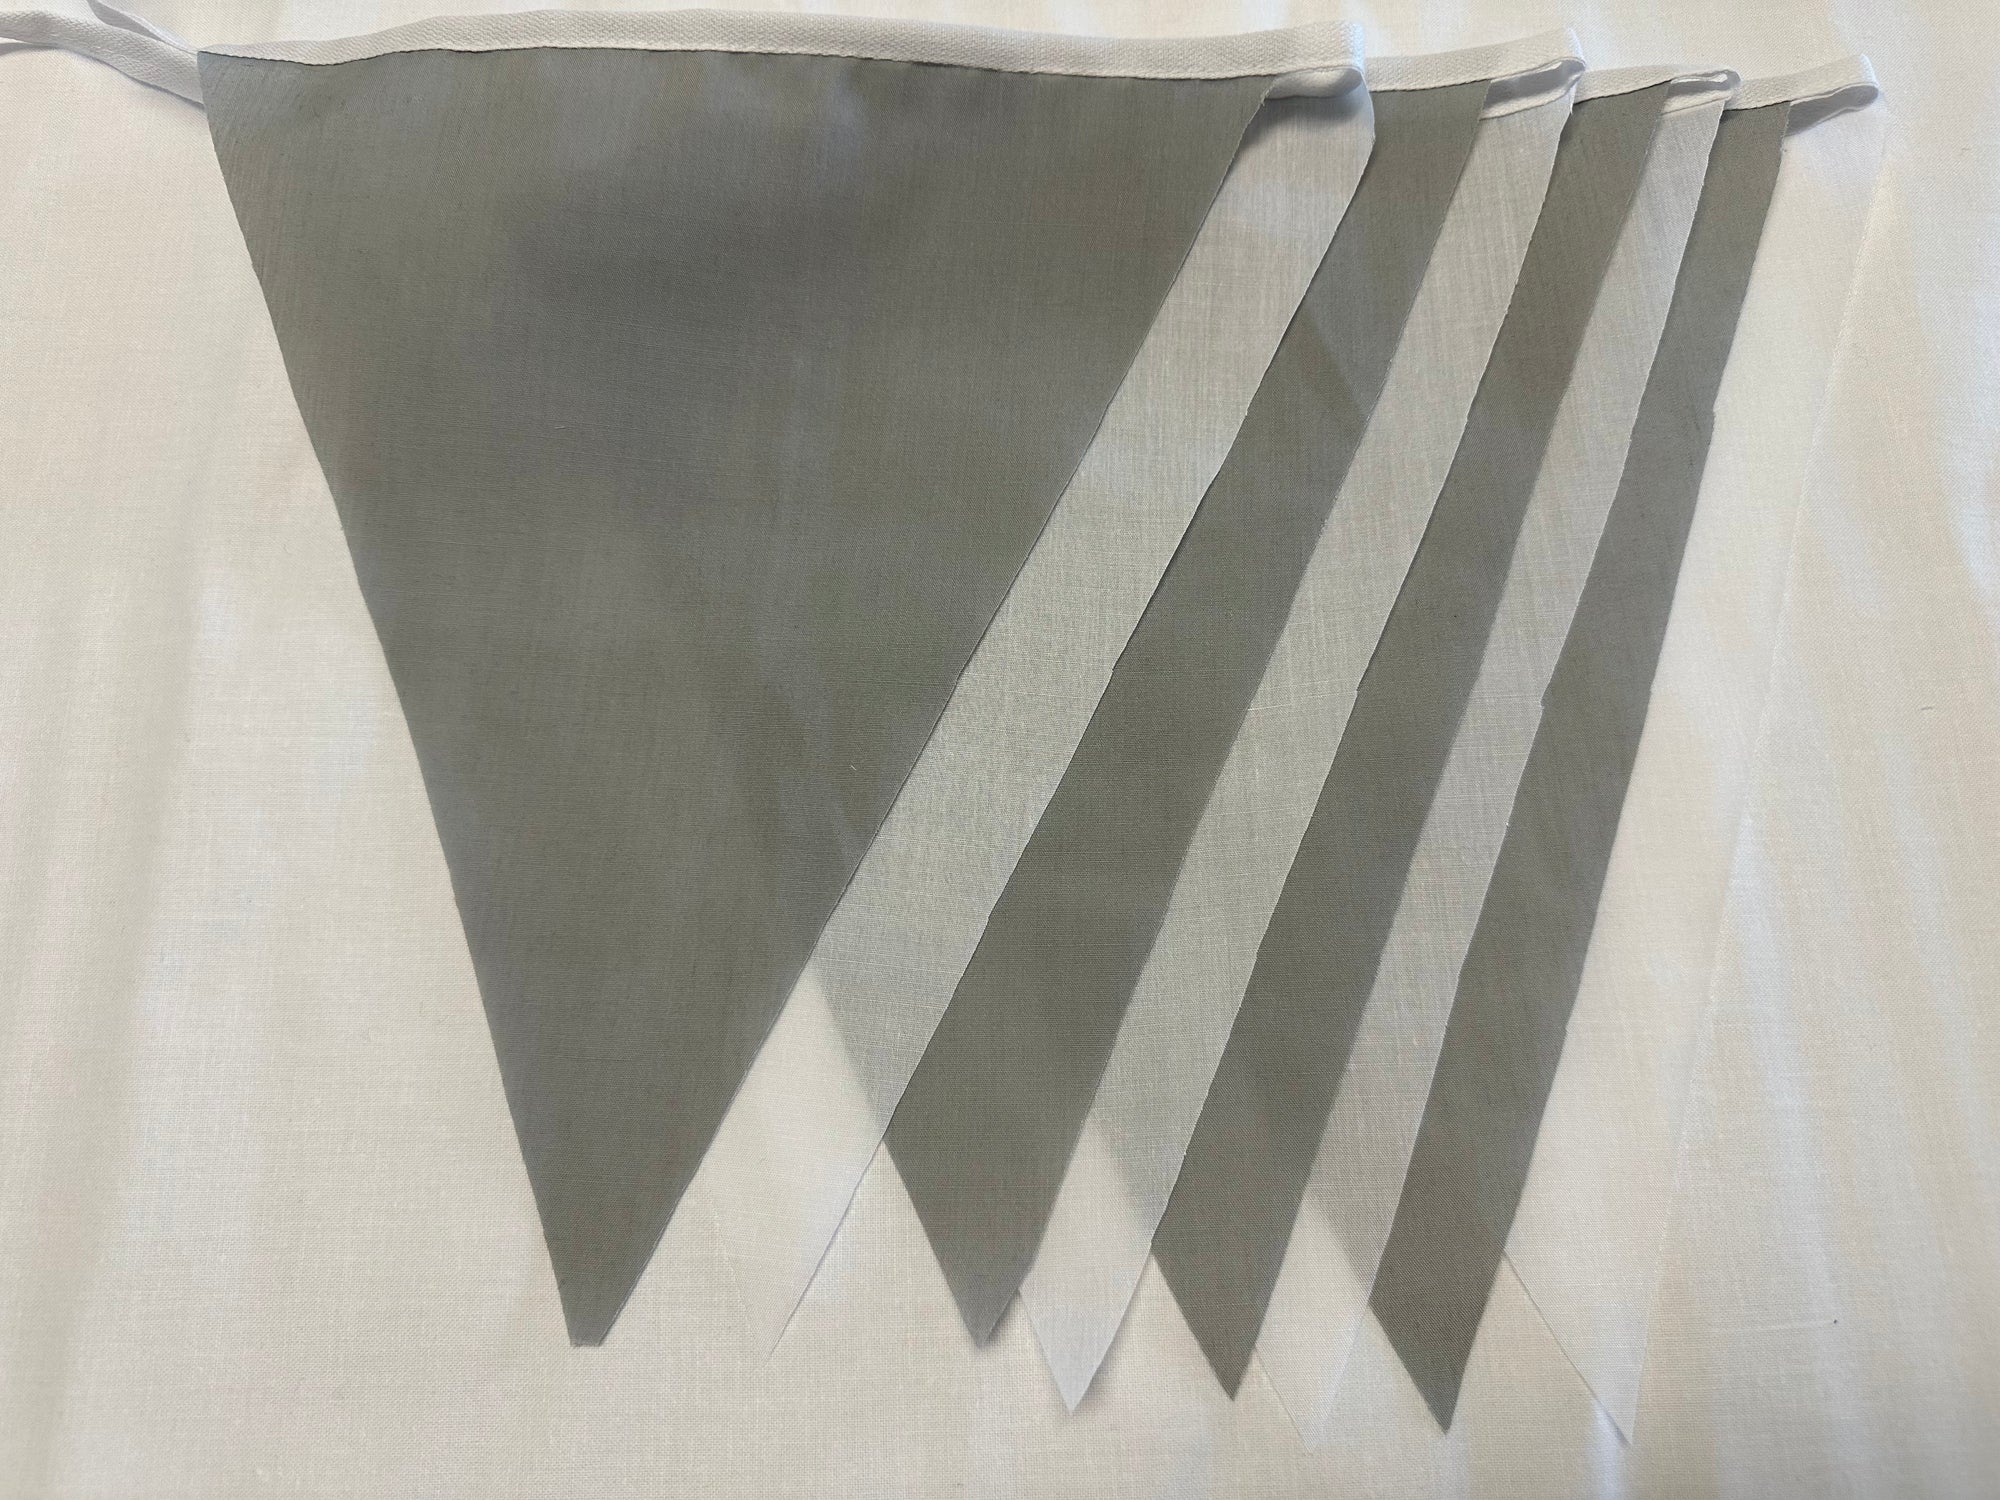 Basic Bunting Silver Grey & White Flags